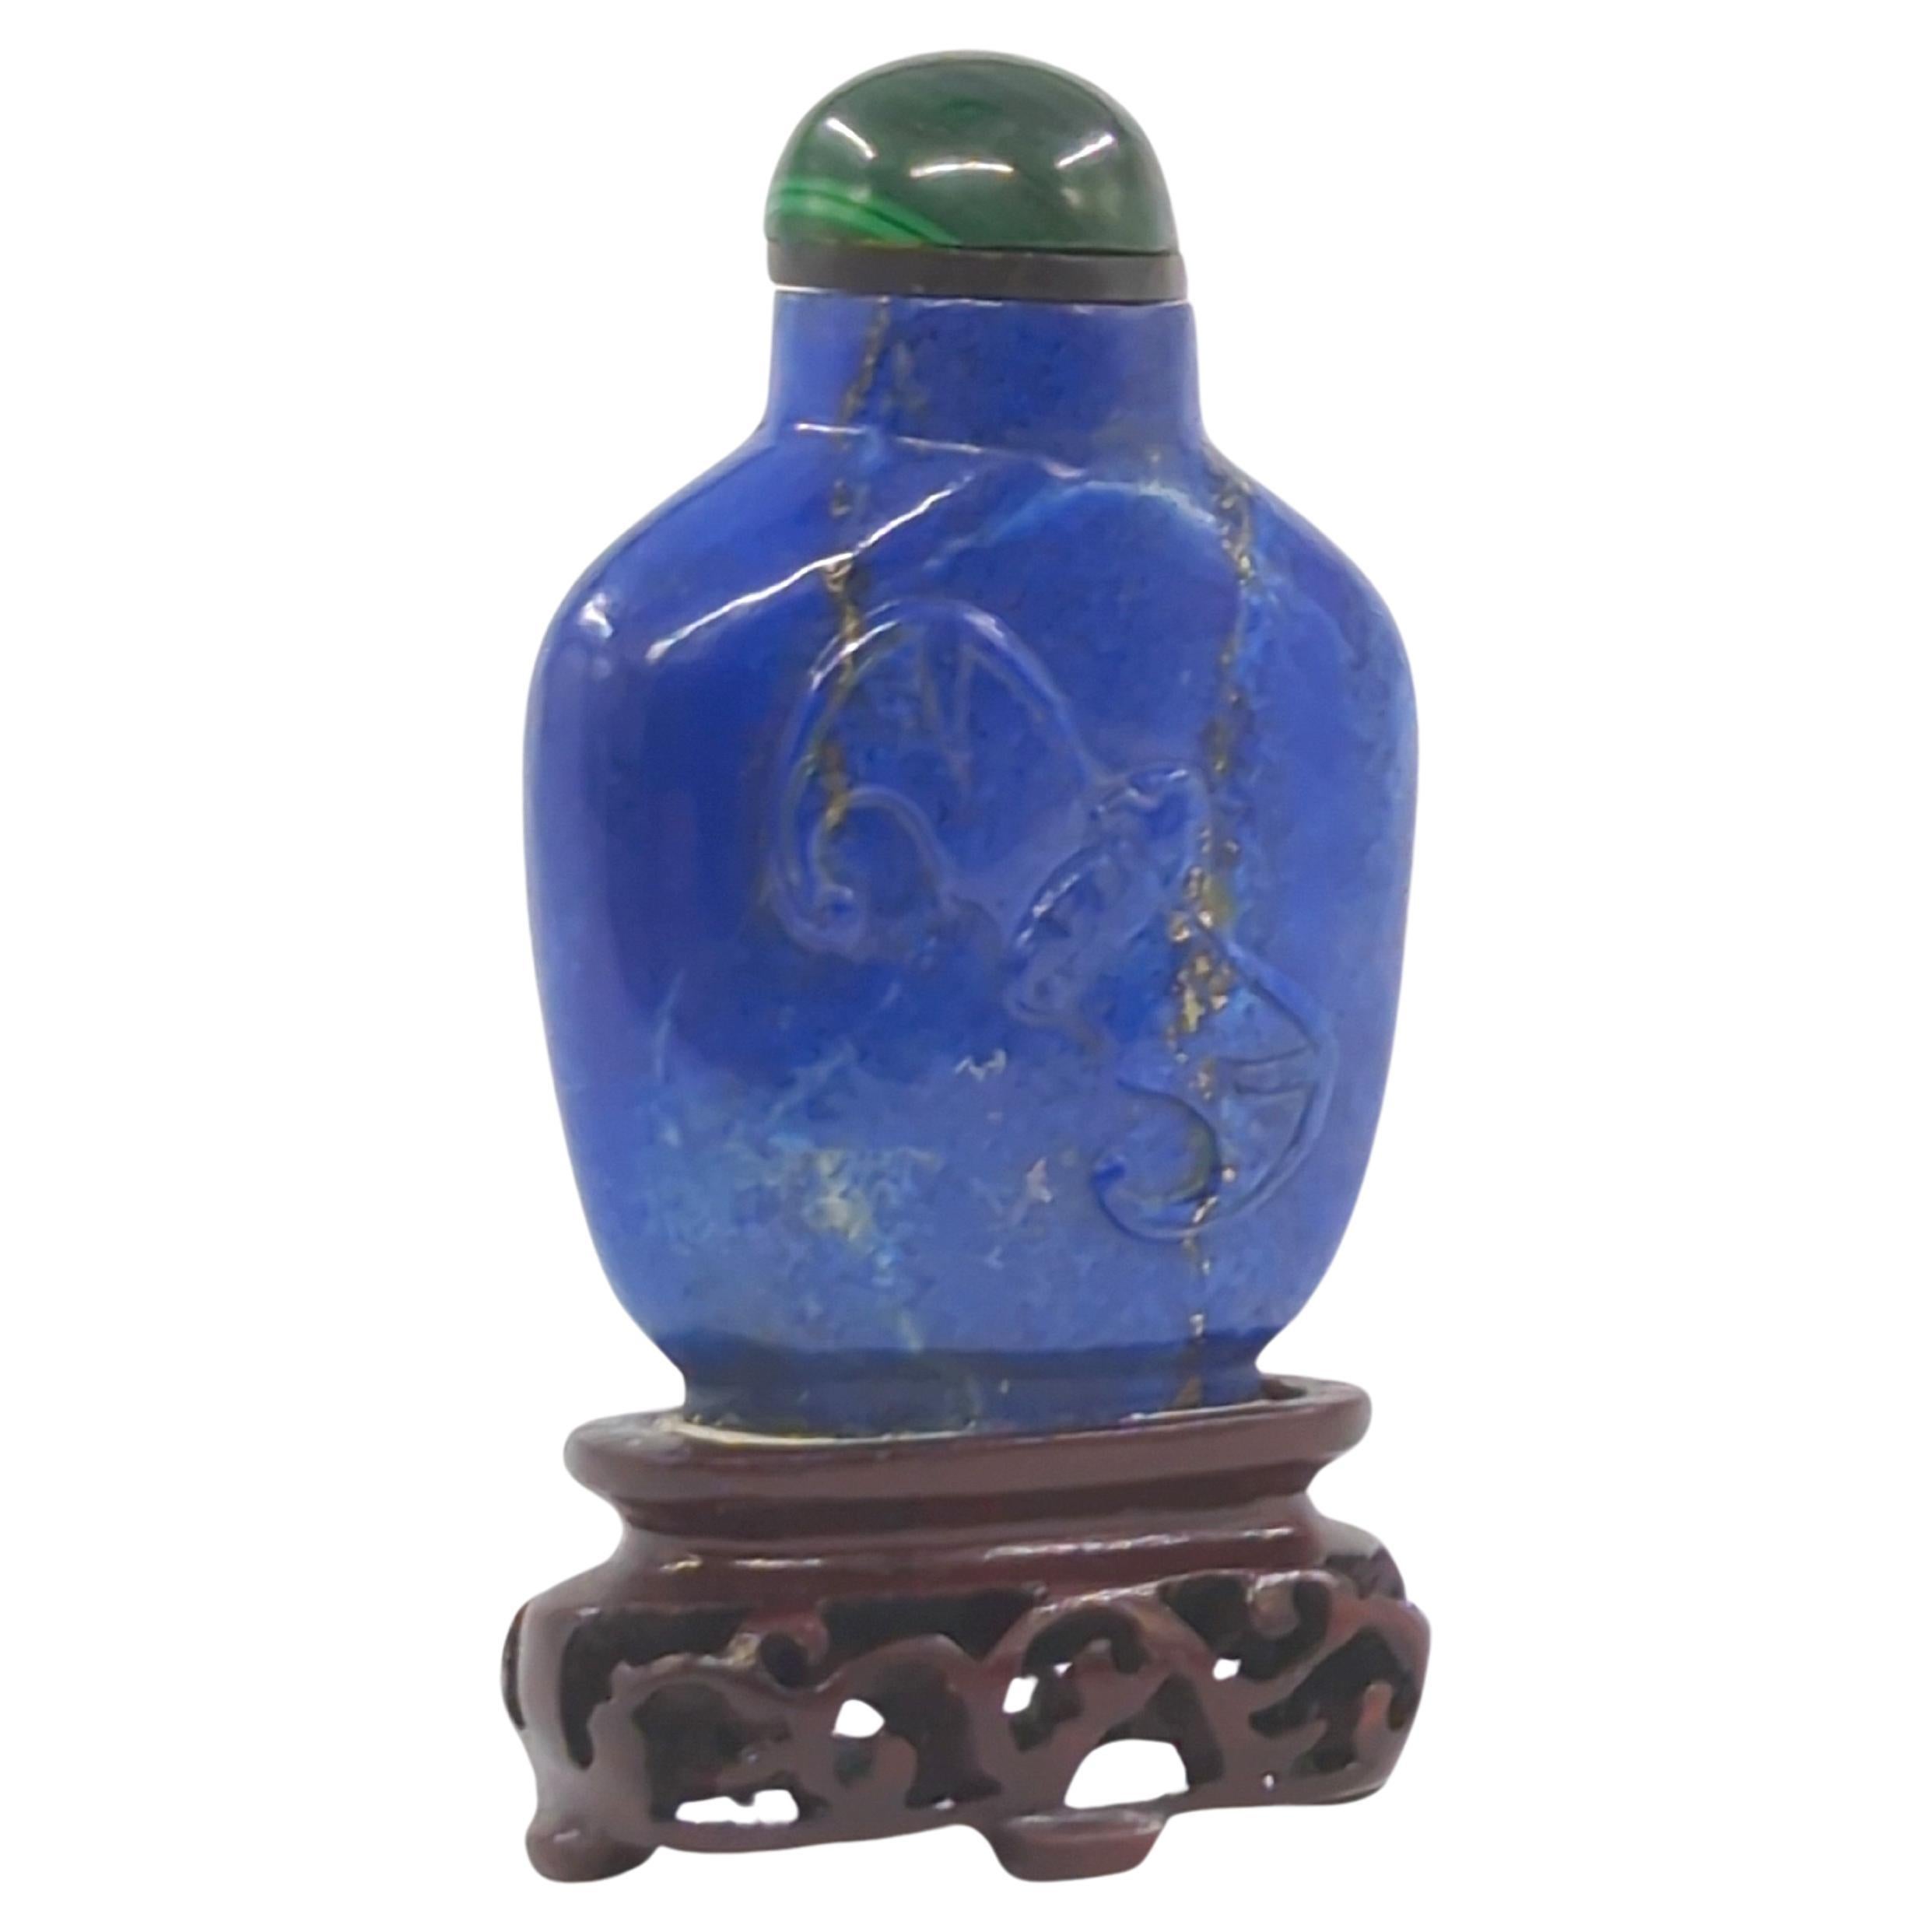 Antique Chinese Lapis Lazuli Relief Carved Snuff Bottle on Stand c.1920 For Sale 2